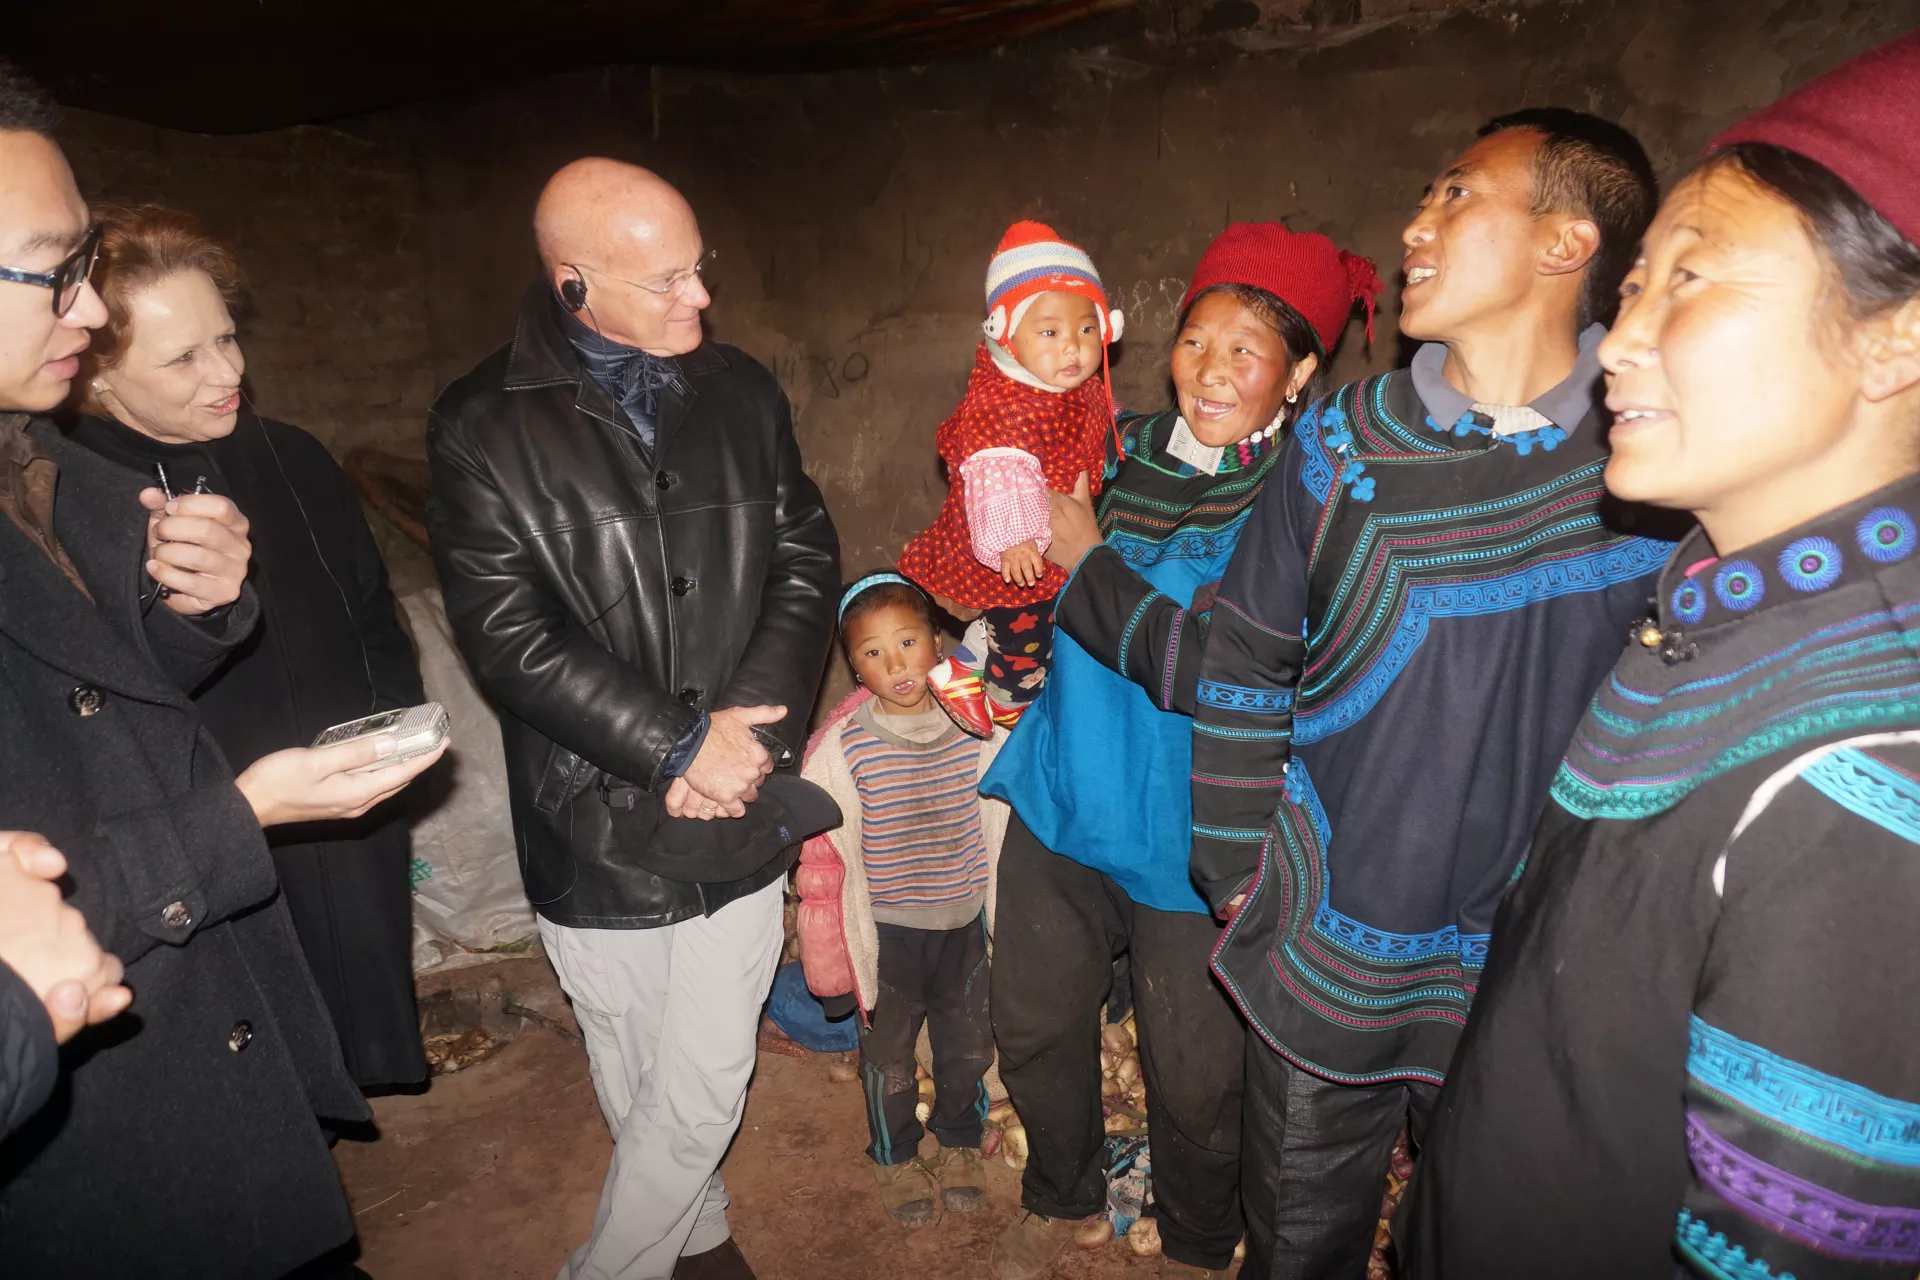 Daniel Toole, UNICEF Regional Director for East Asia and the Pacific, visits a rural household in Tiaoba Village, Zhaojue County, Liangshan, Sichuan Province, China on January 15, 2015.